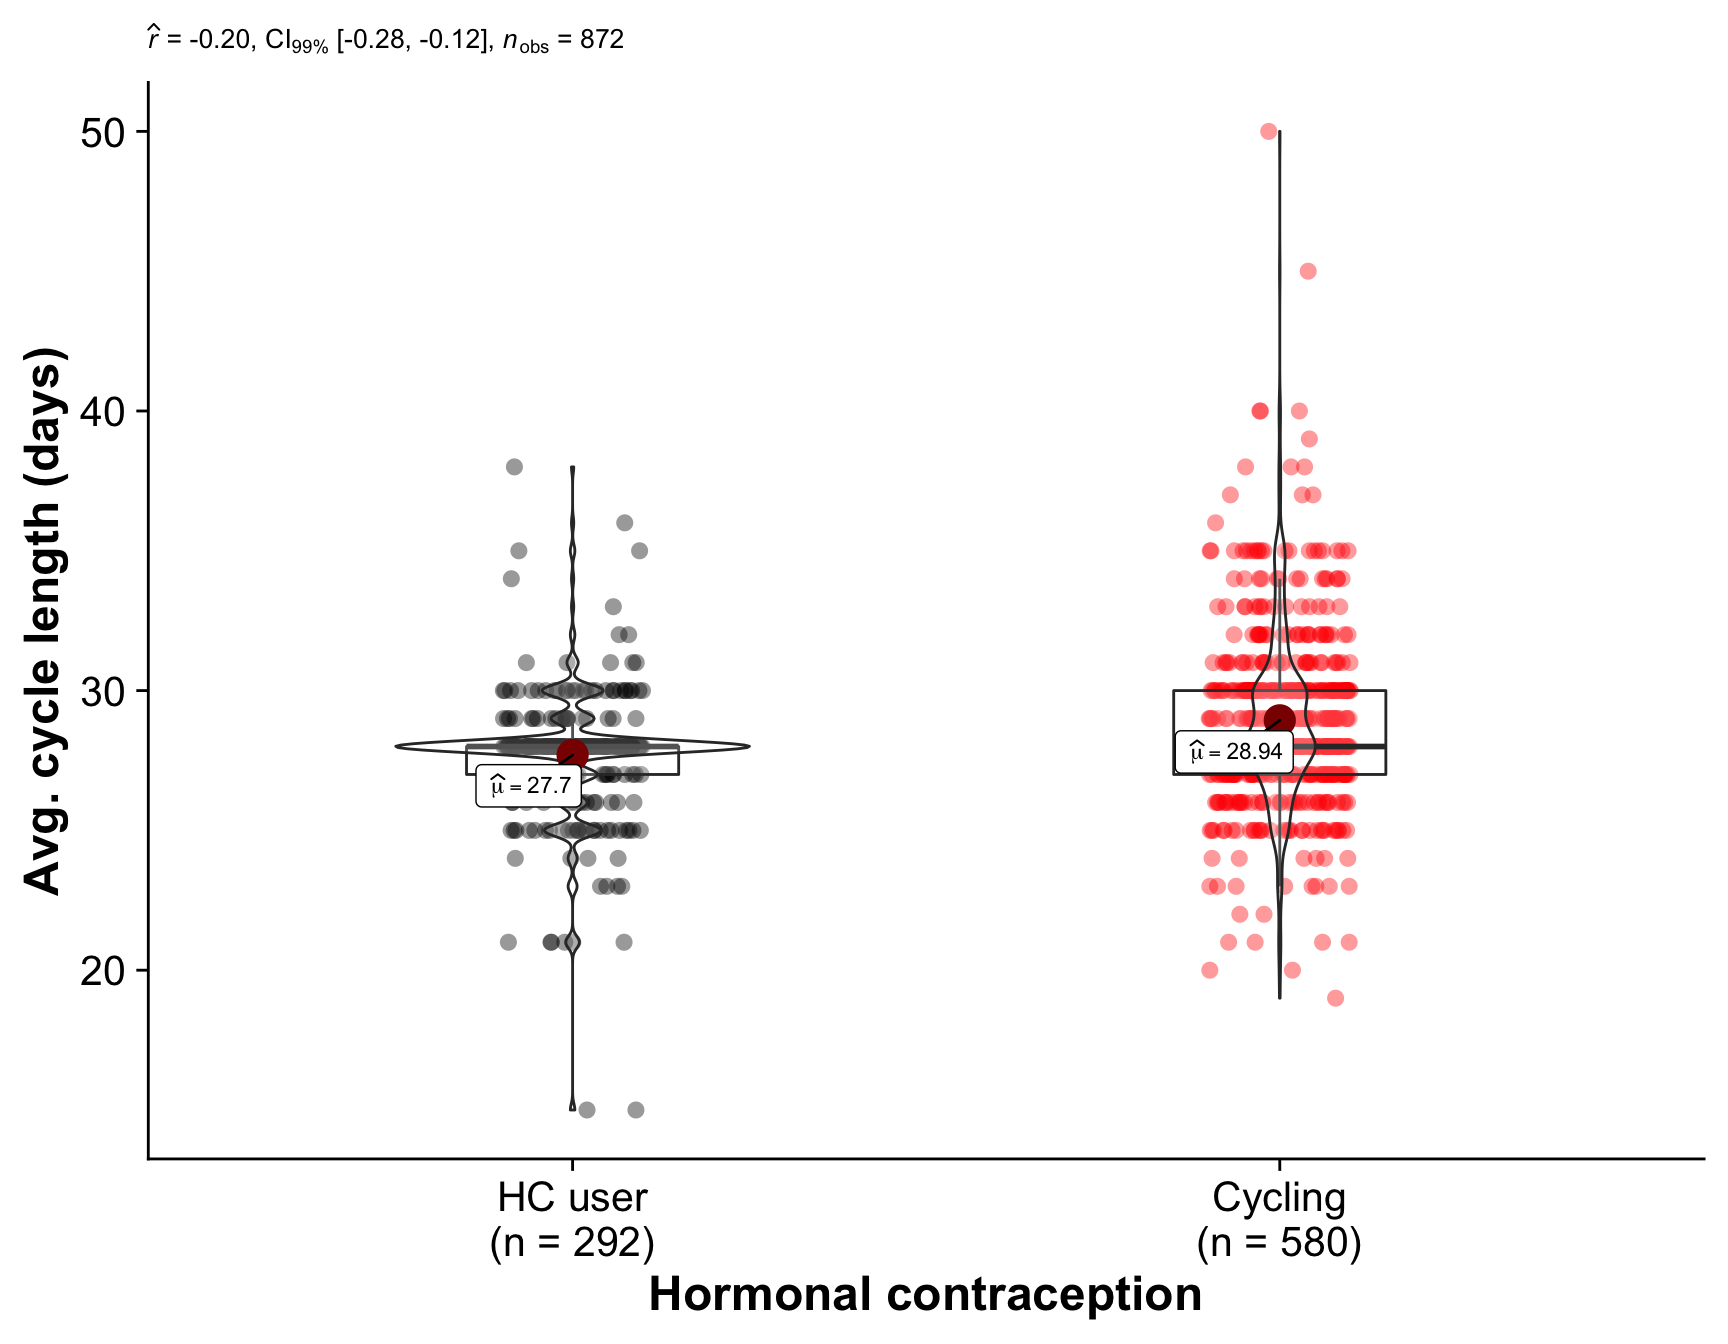 Comparison of the hormonal contraception users (our quasi-control group) with women who are regularly cycling. The plot shows the distribution of values in each group and the results of a Mann-Whitney U test.